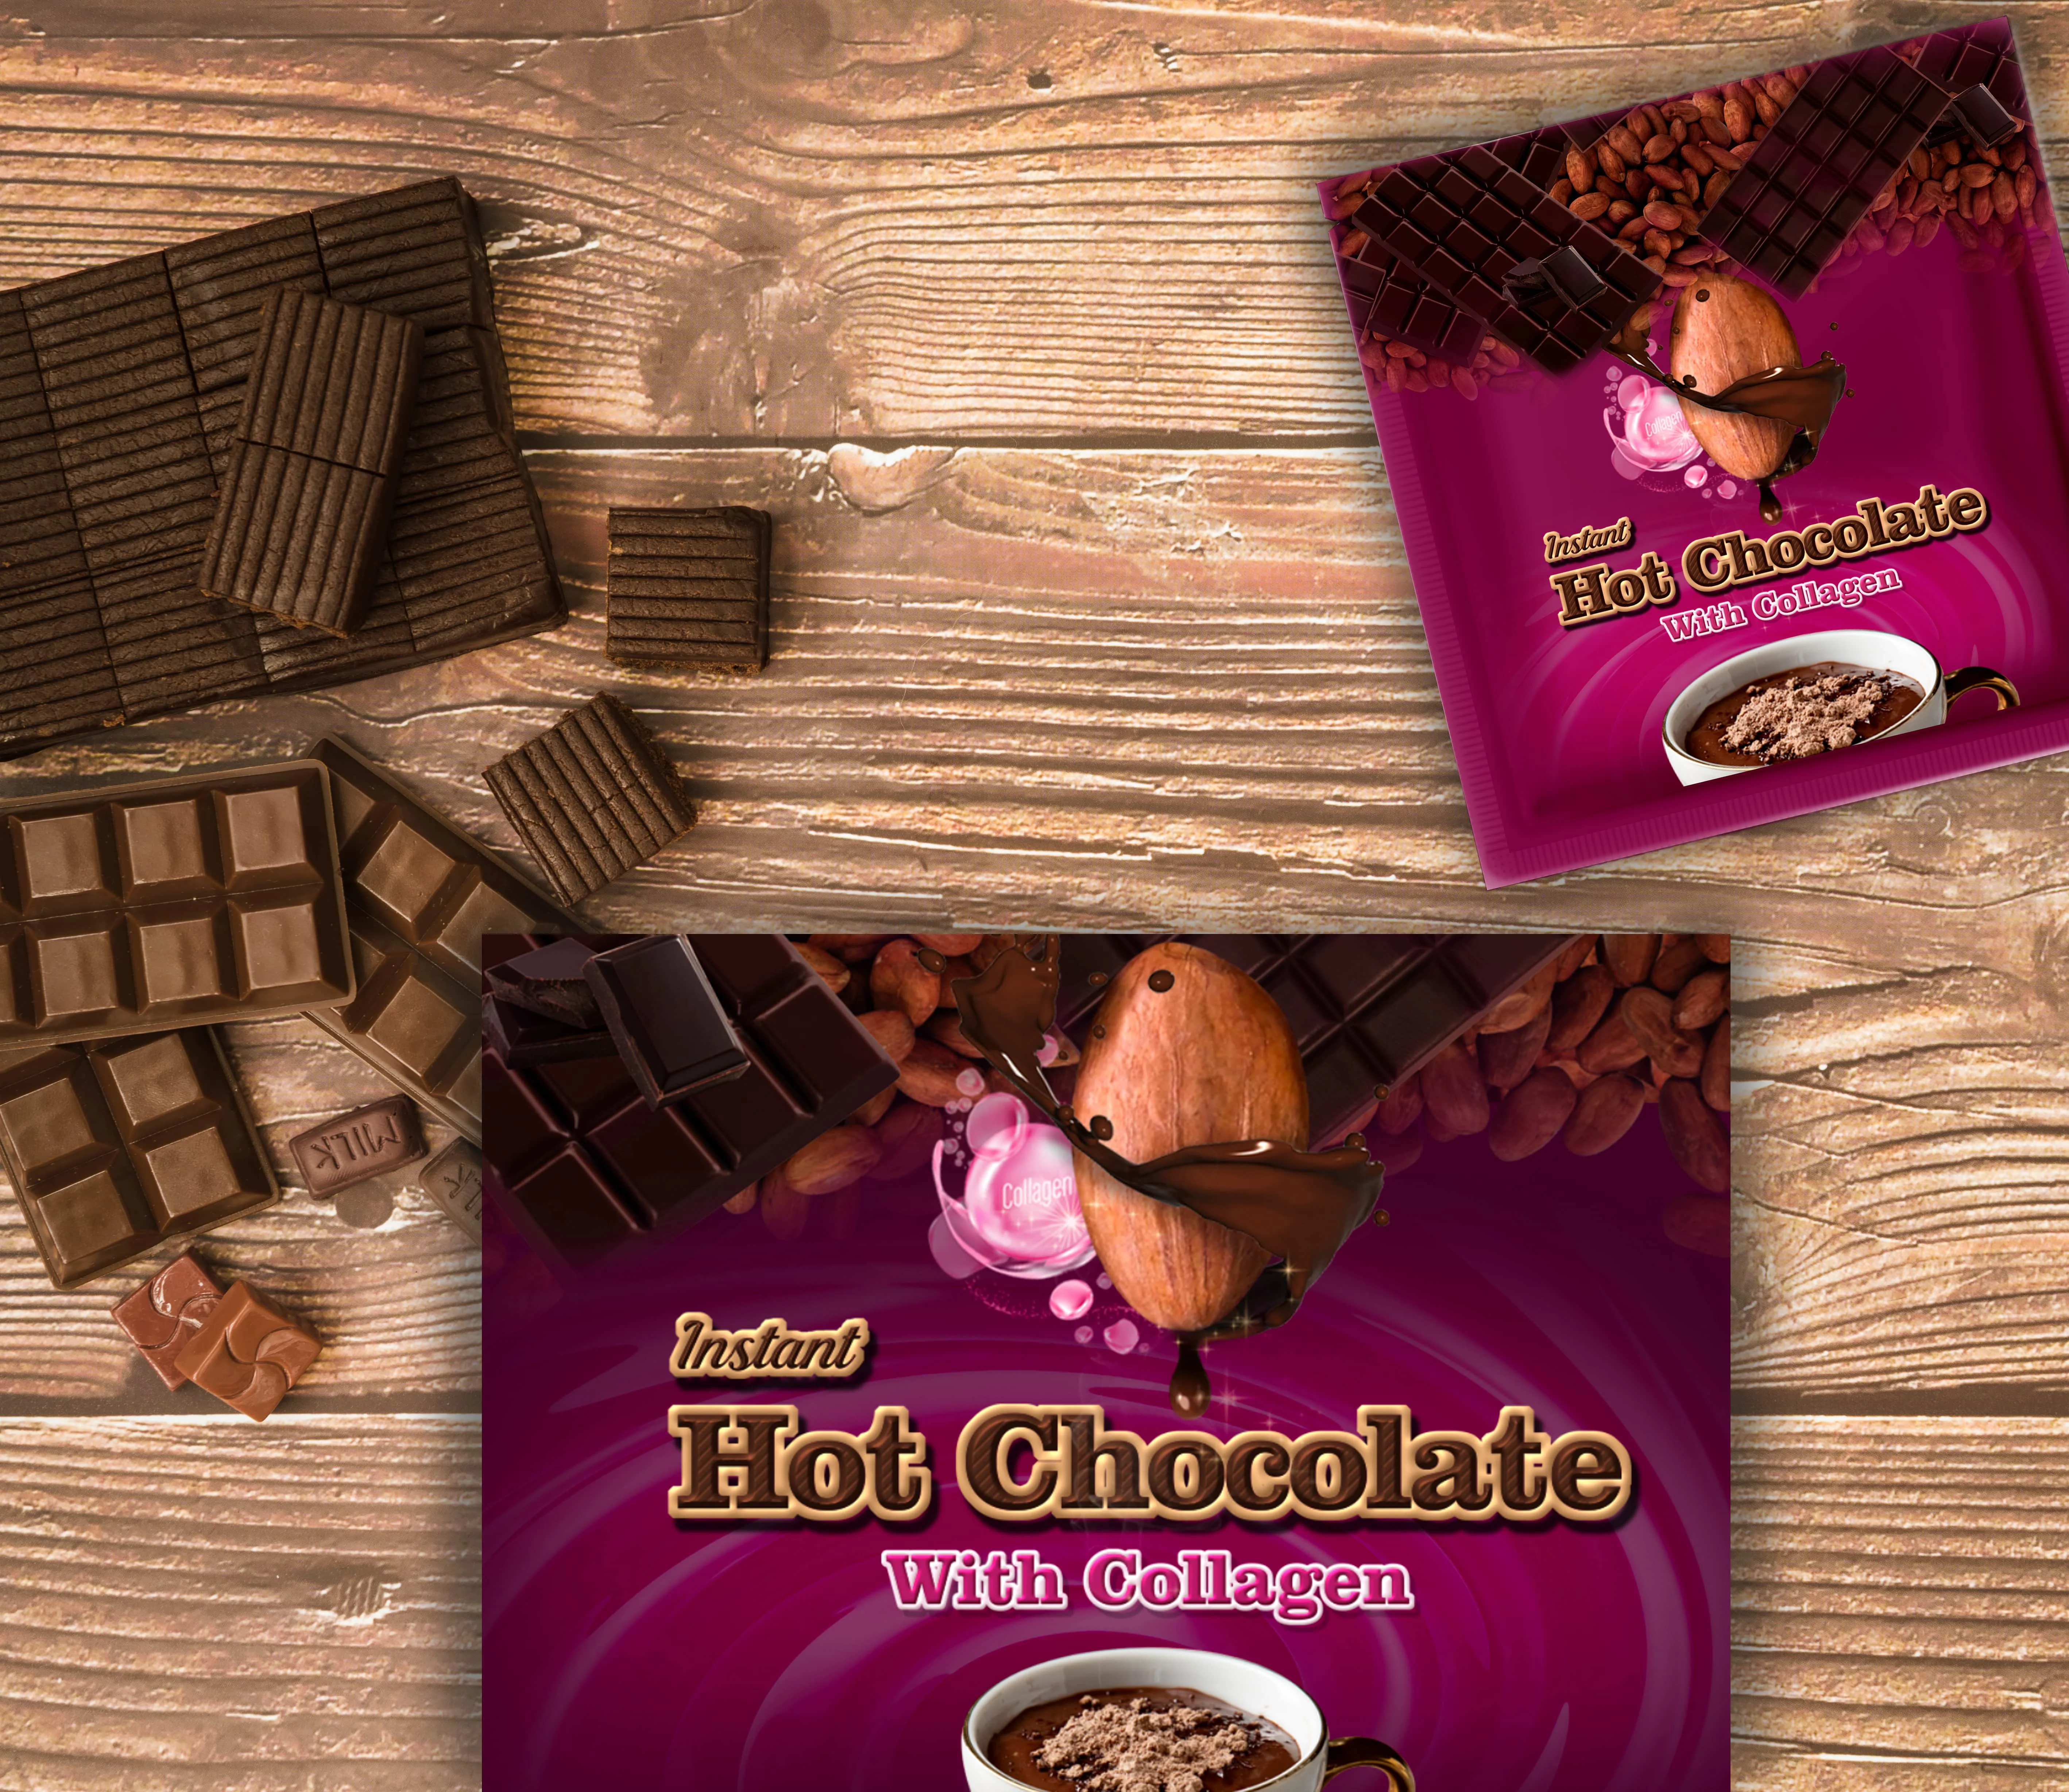 Malaysia Made OEM Hot Chocolate with Collagen Packaging ODM Healthy Product Using Marine Collagen Halal GMP Manufacturer HACCP